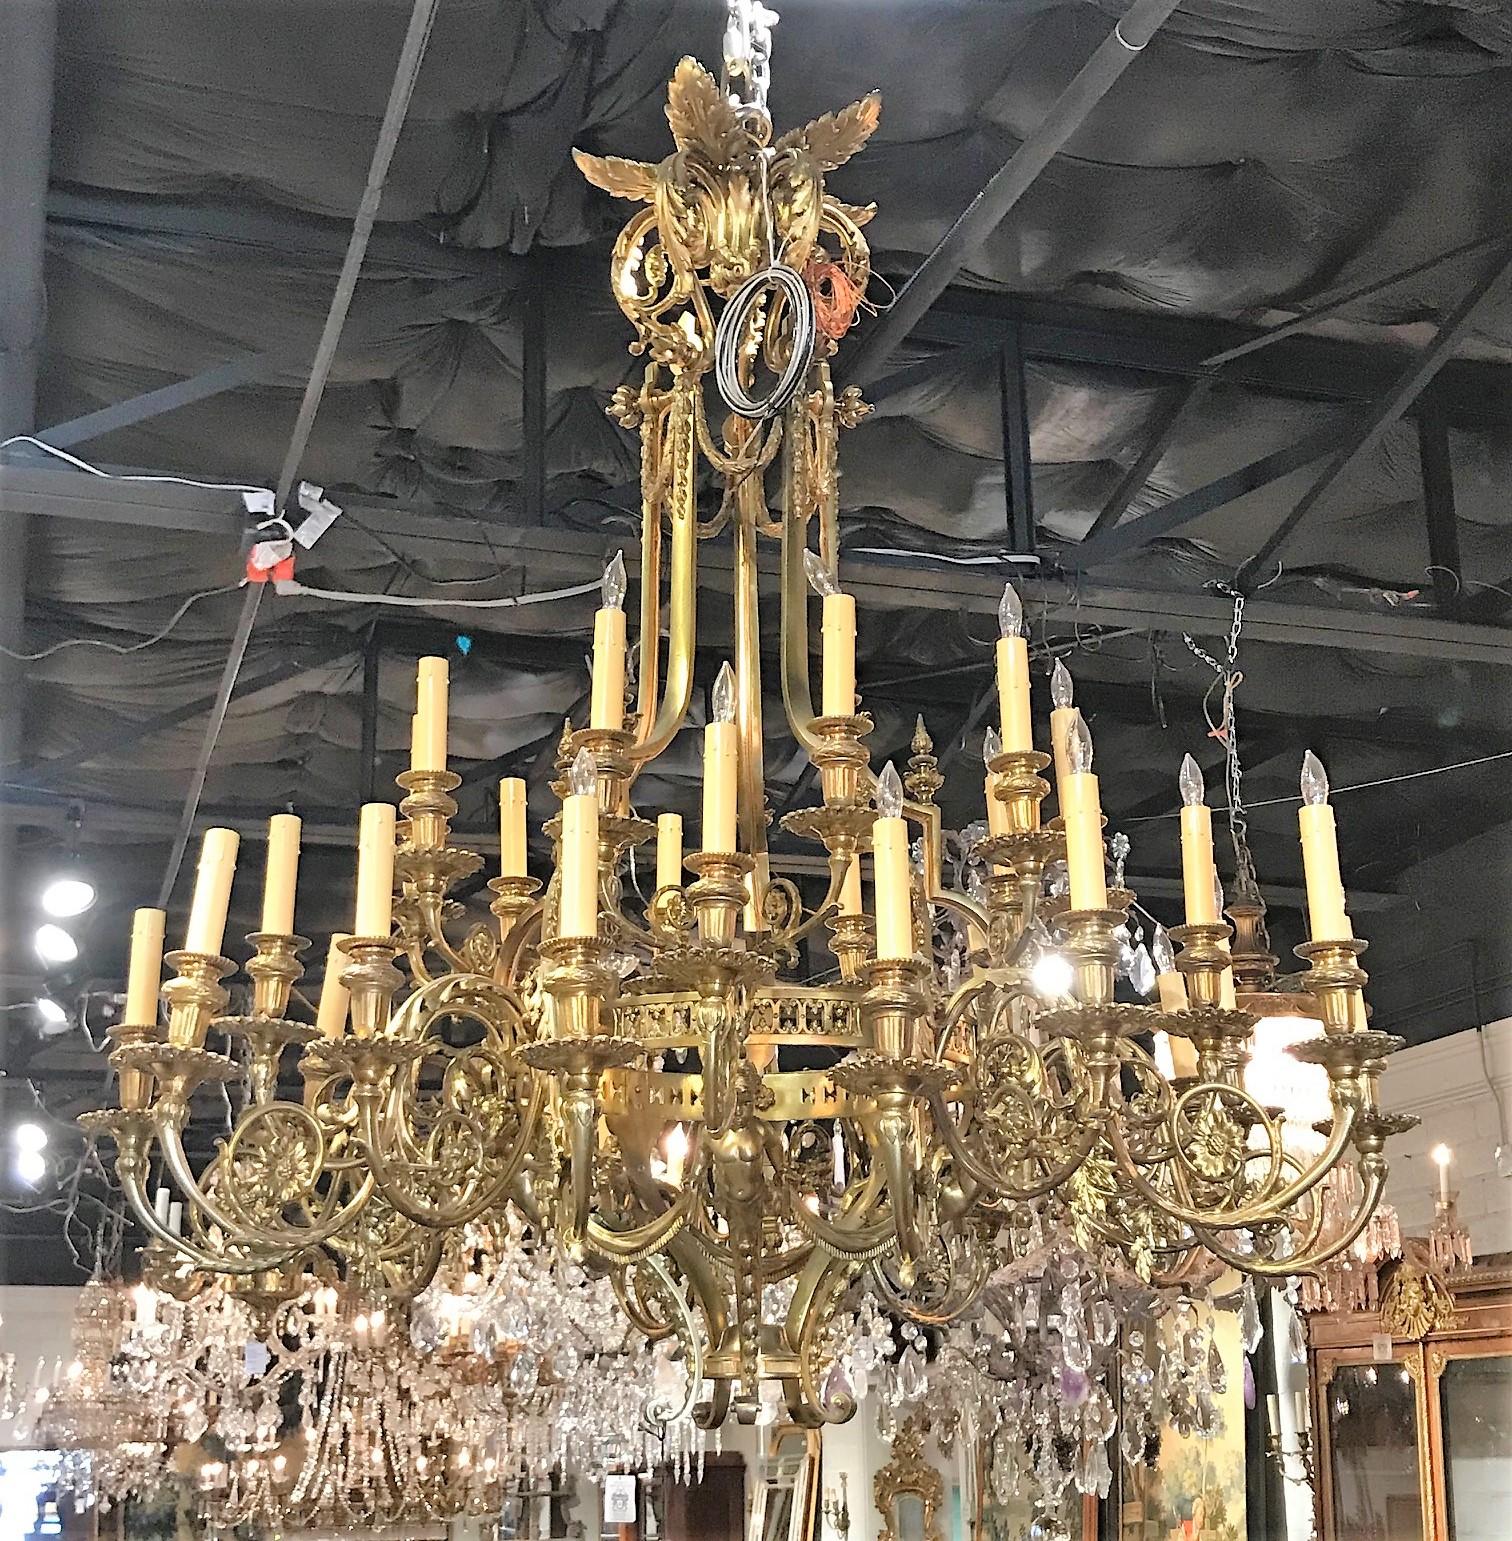 Remarkable large French 36-light gilt bronze cherubic chandelier of superior quality. The ornately decorated crown with leaf-sprays atop elaborately scrolled arms adorned with acanthus leaves, flower heads, and cast bronze cherubs holding fringed